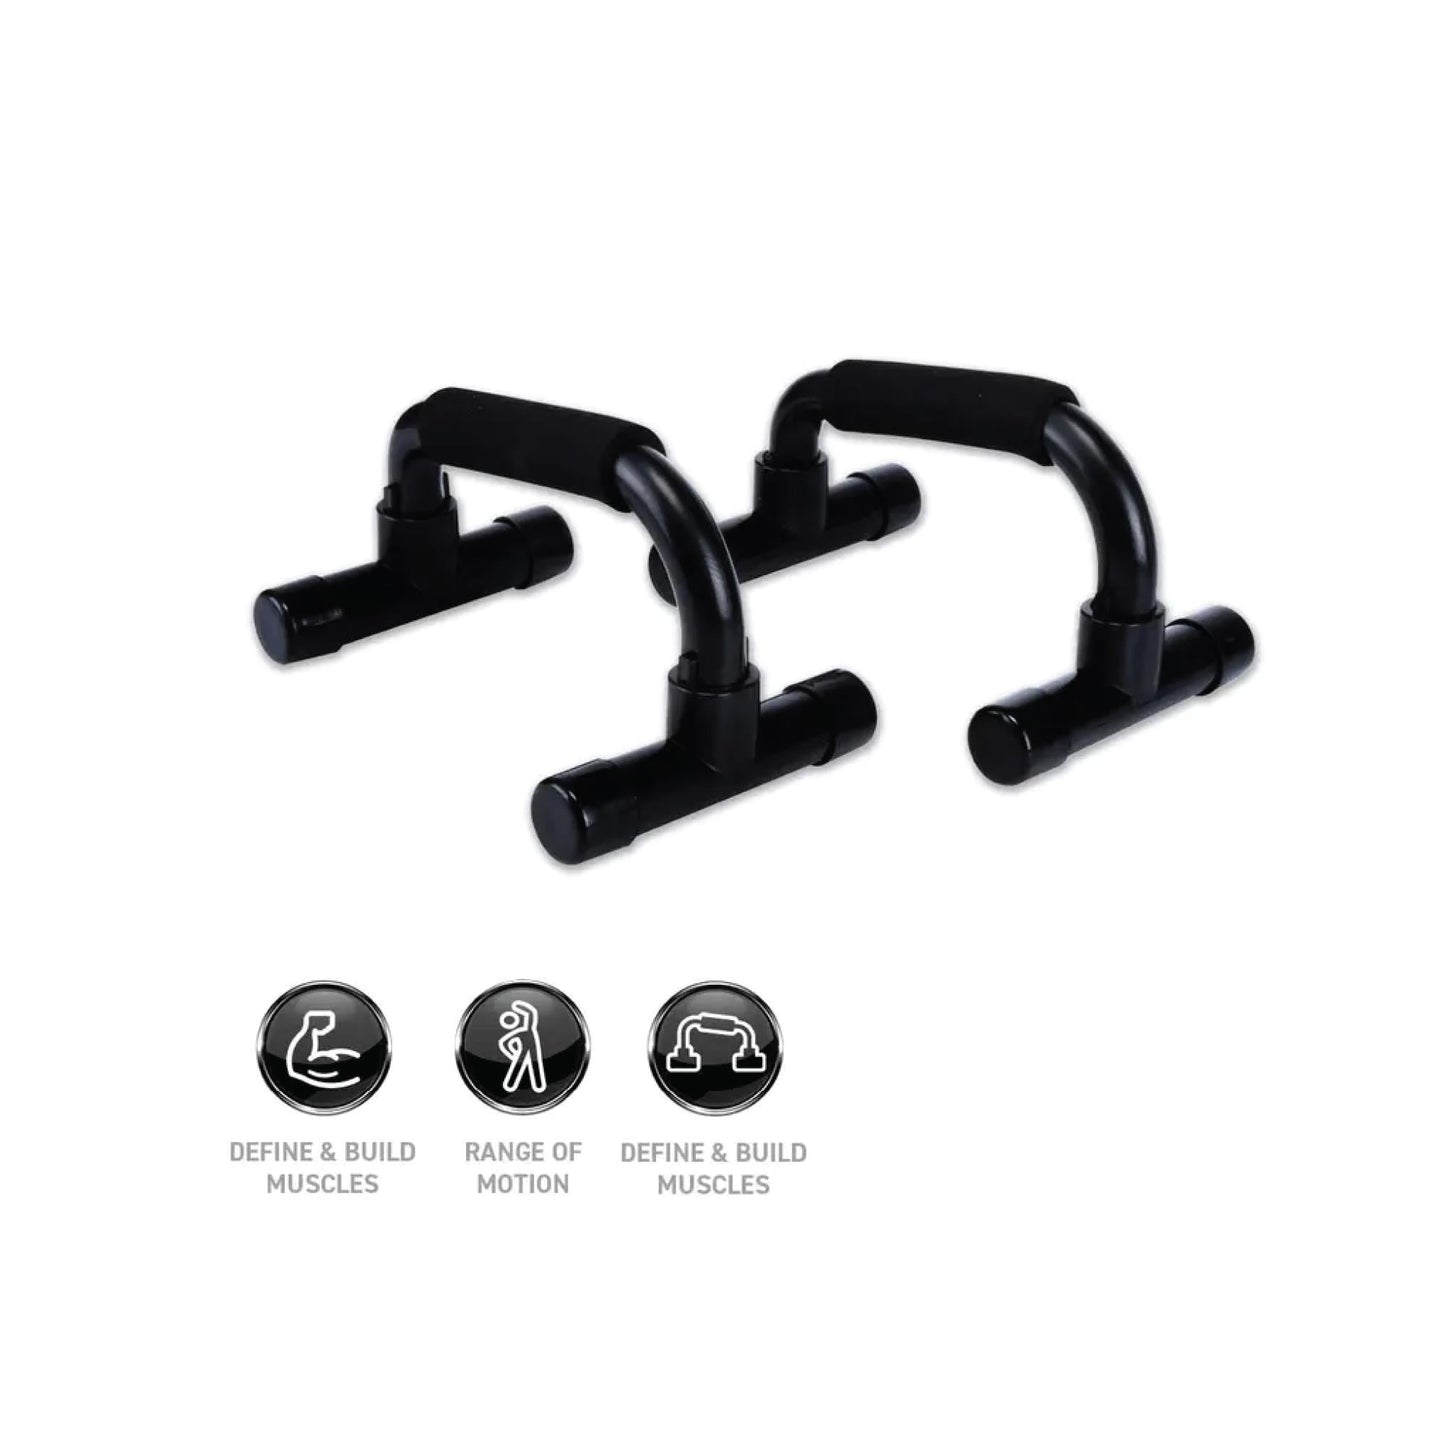 Push Up Bars Foam Grip Handles Workout Press Home Gym Fitness Stand Equipment